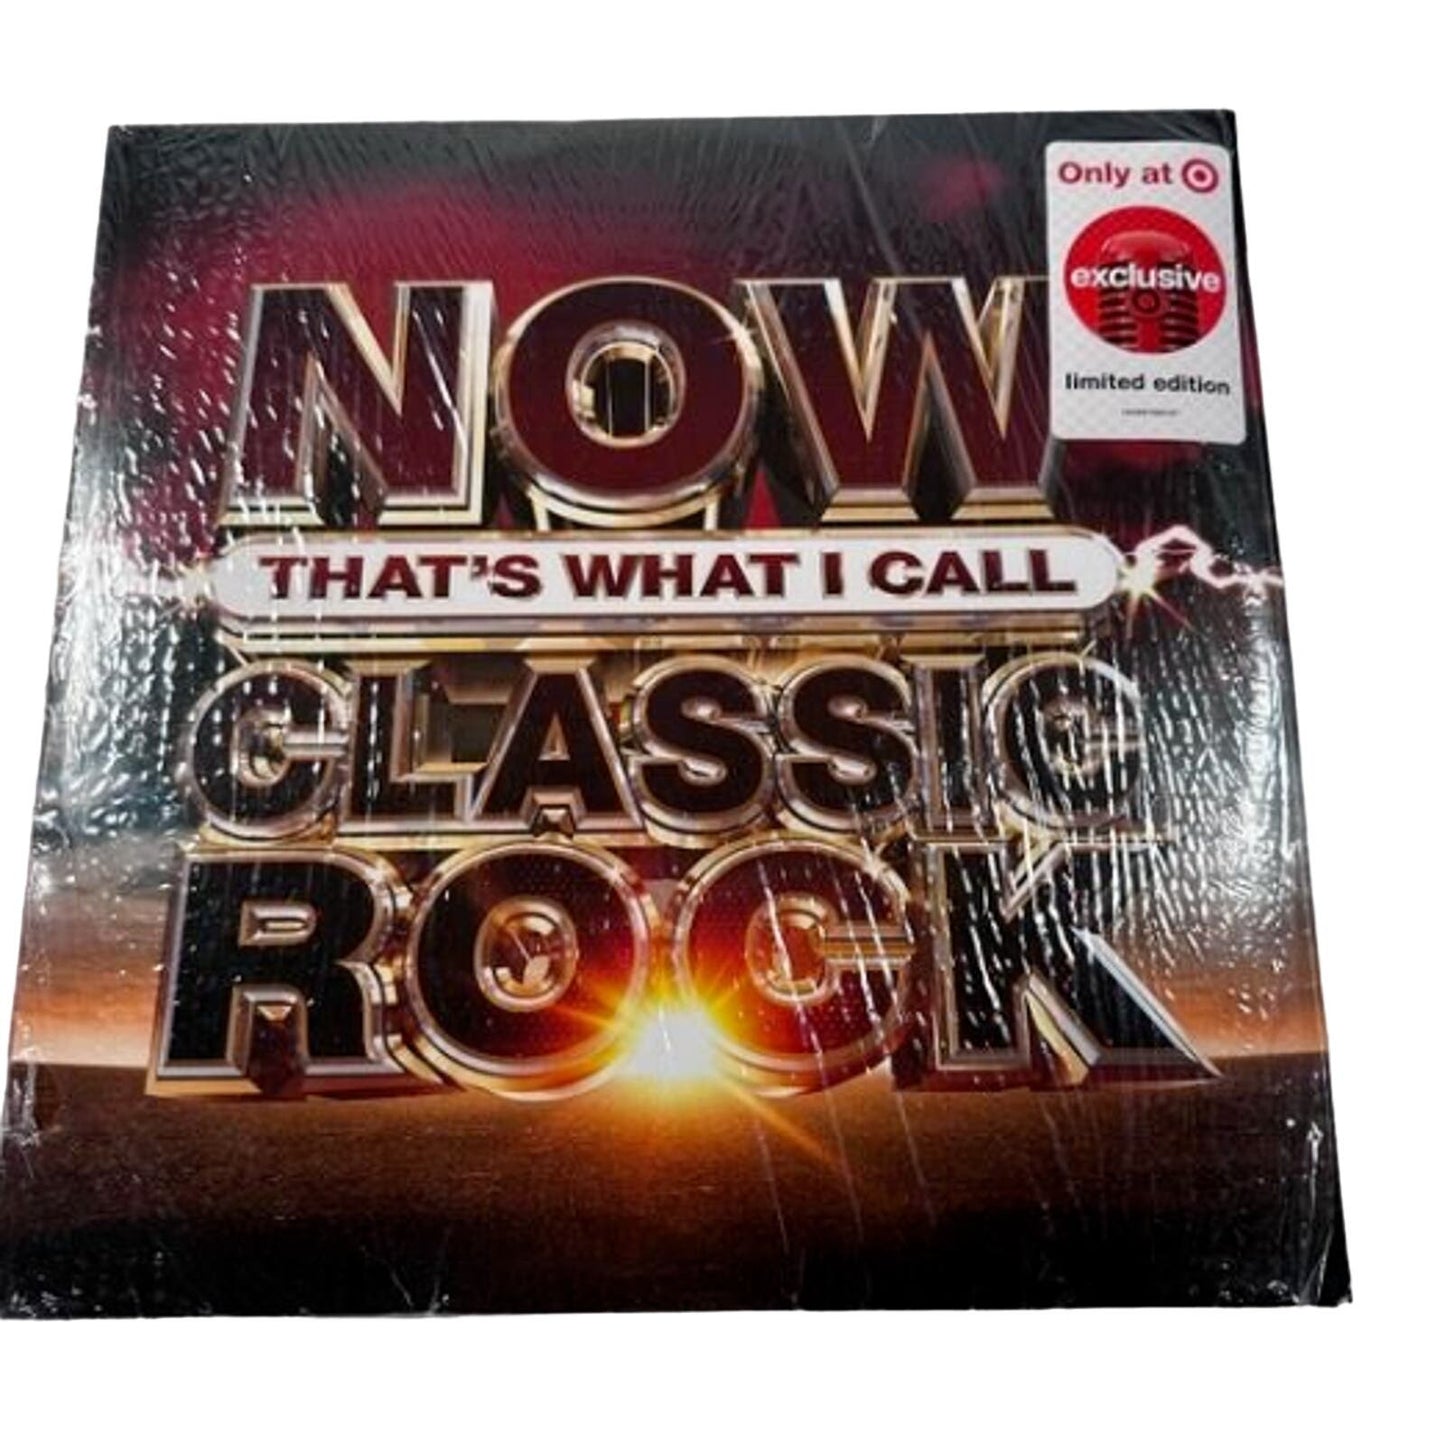 Various - NOW Classic Rock Limited Edition Vinyl